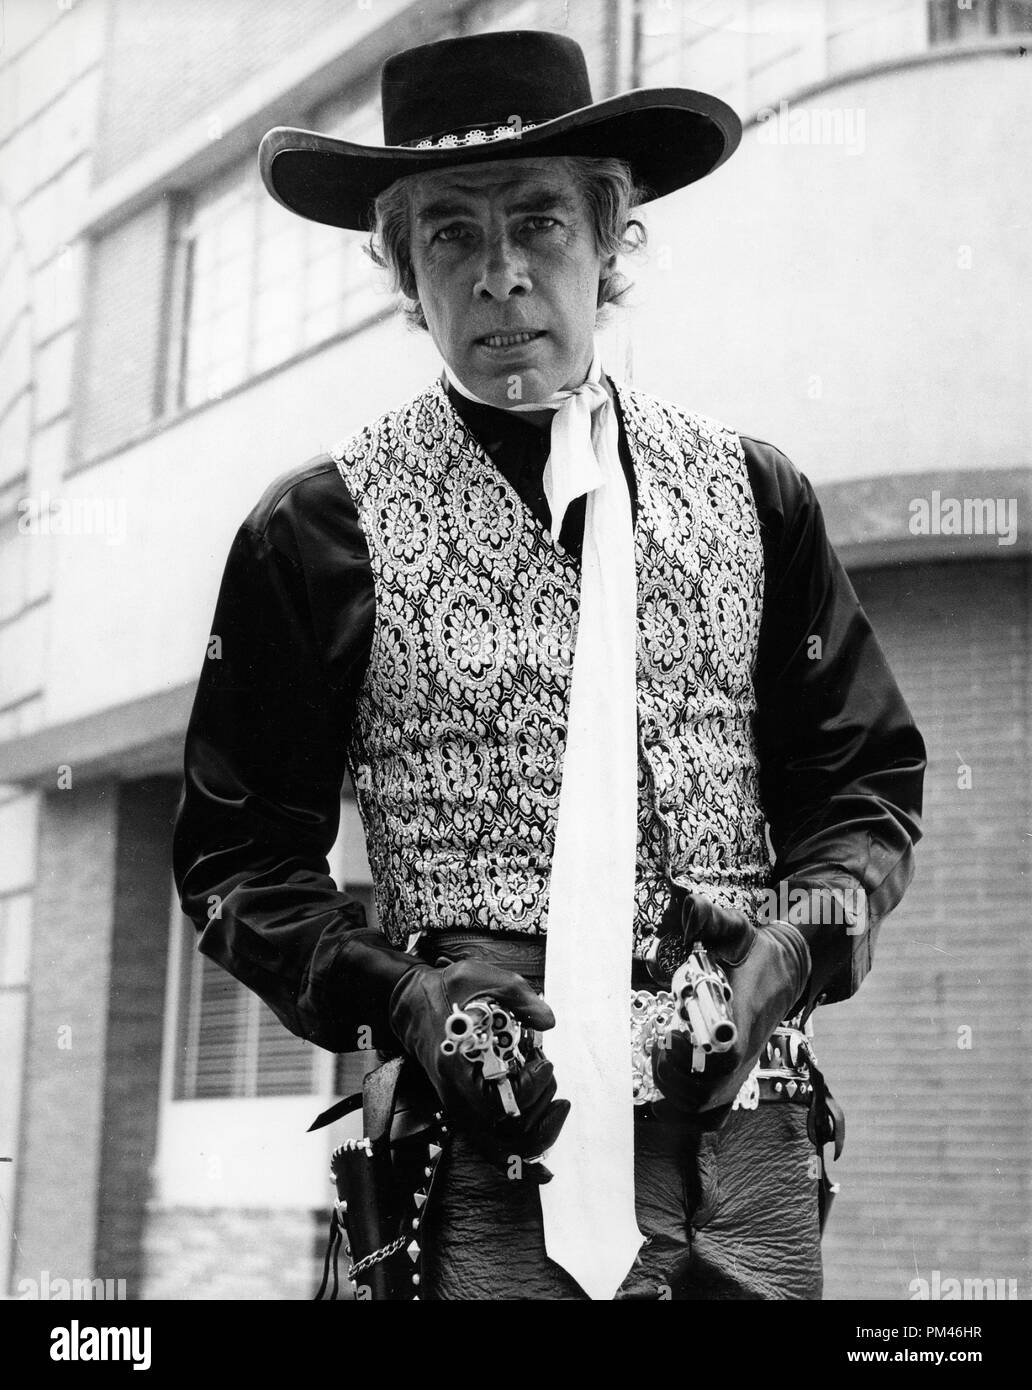 Lee Marvin in character for the film 